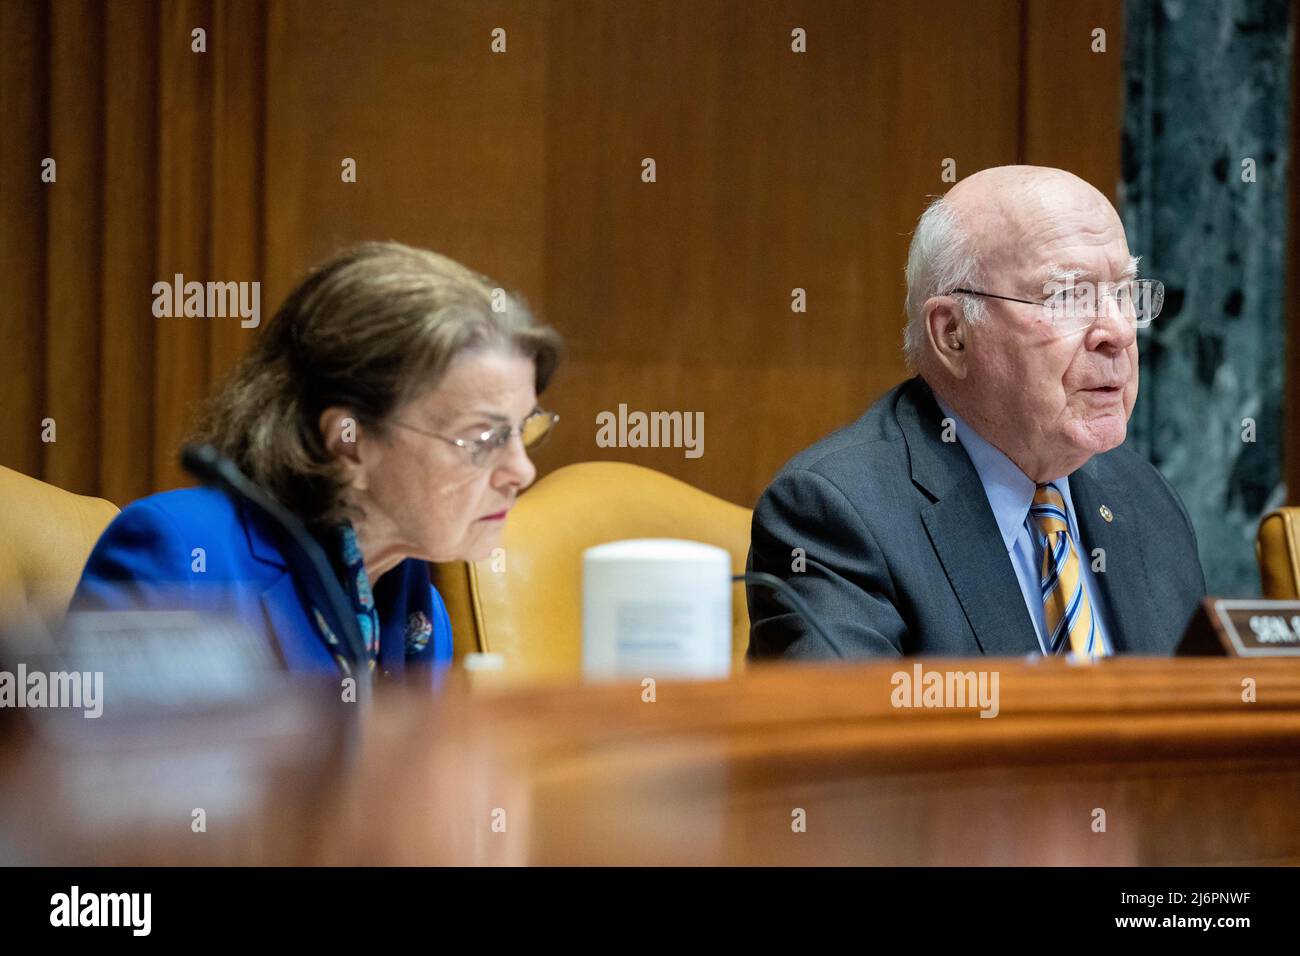 Sen. Dianne Feinstein, D-Calif., left, and Sen. Patrick Leahy, D-Vt., attend a Senate appropriations hearing in the defense subcommittee the Capitol in Washington, DC, USA, on Tuesday, May 3, 2022. Photo by Amanda Andrade-Rhoades/Pool/ABACAPRESS.COM Stock Photo